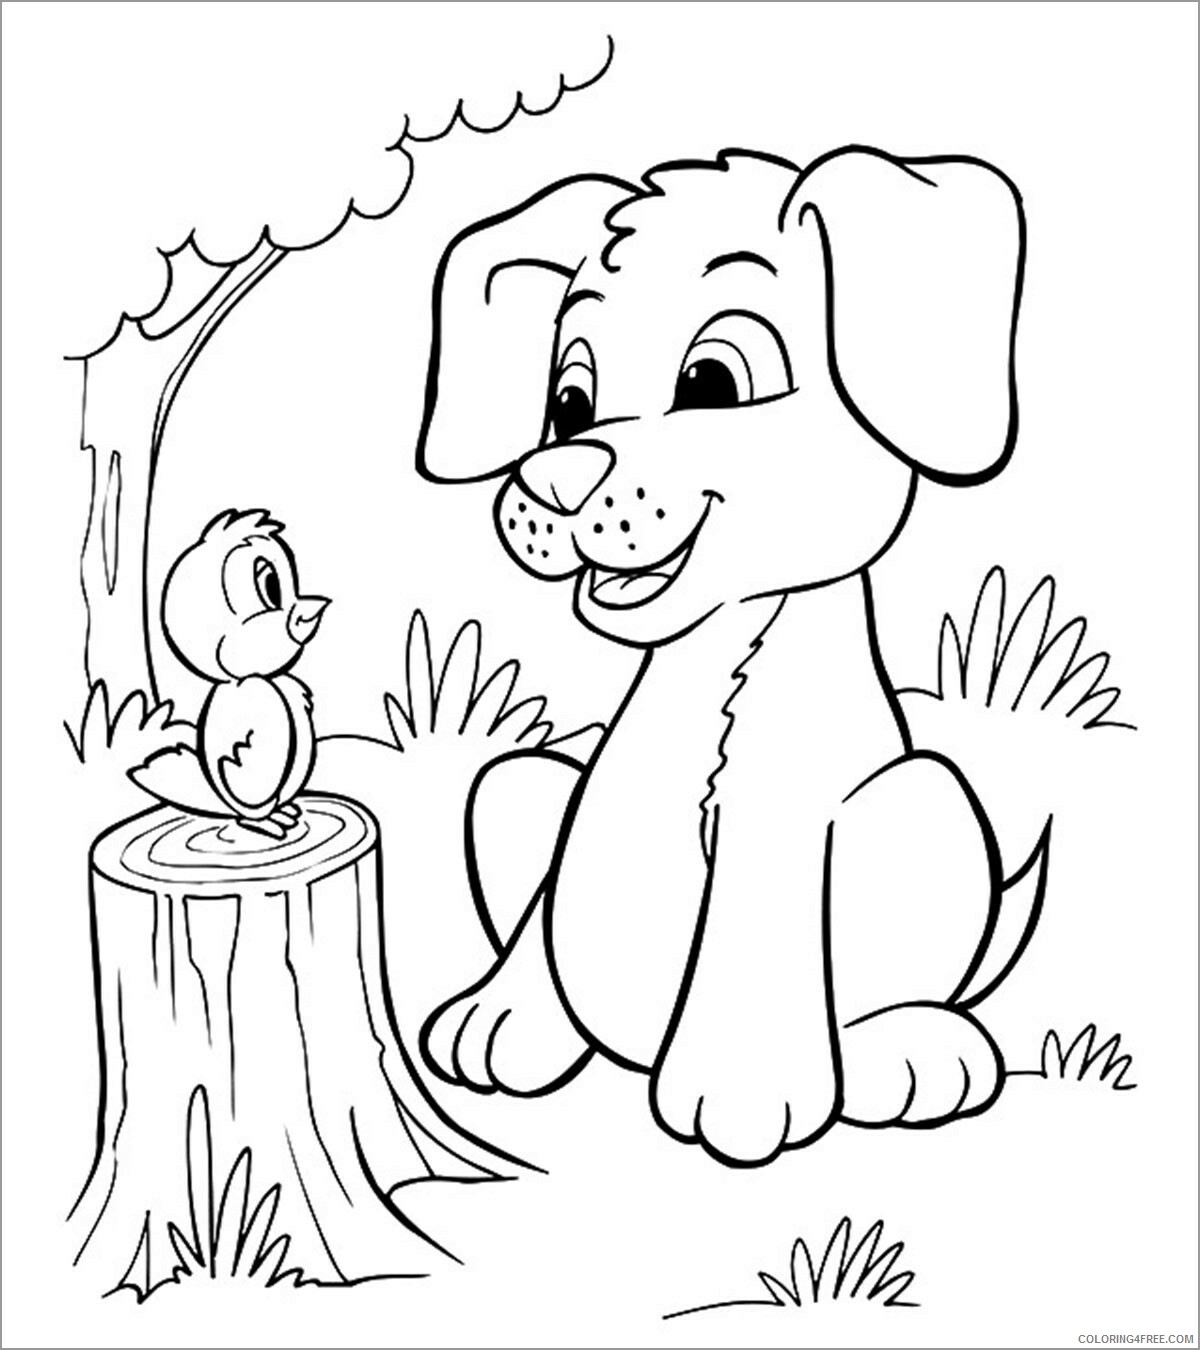 Puppy Coloring Pages Animal Printable Sheets labrador puppy 2021 4085 Coloring4free